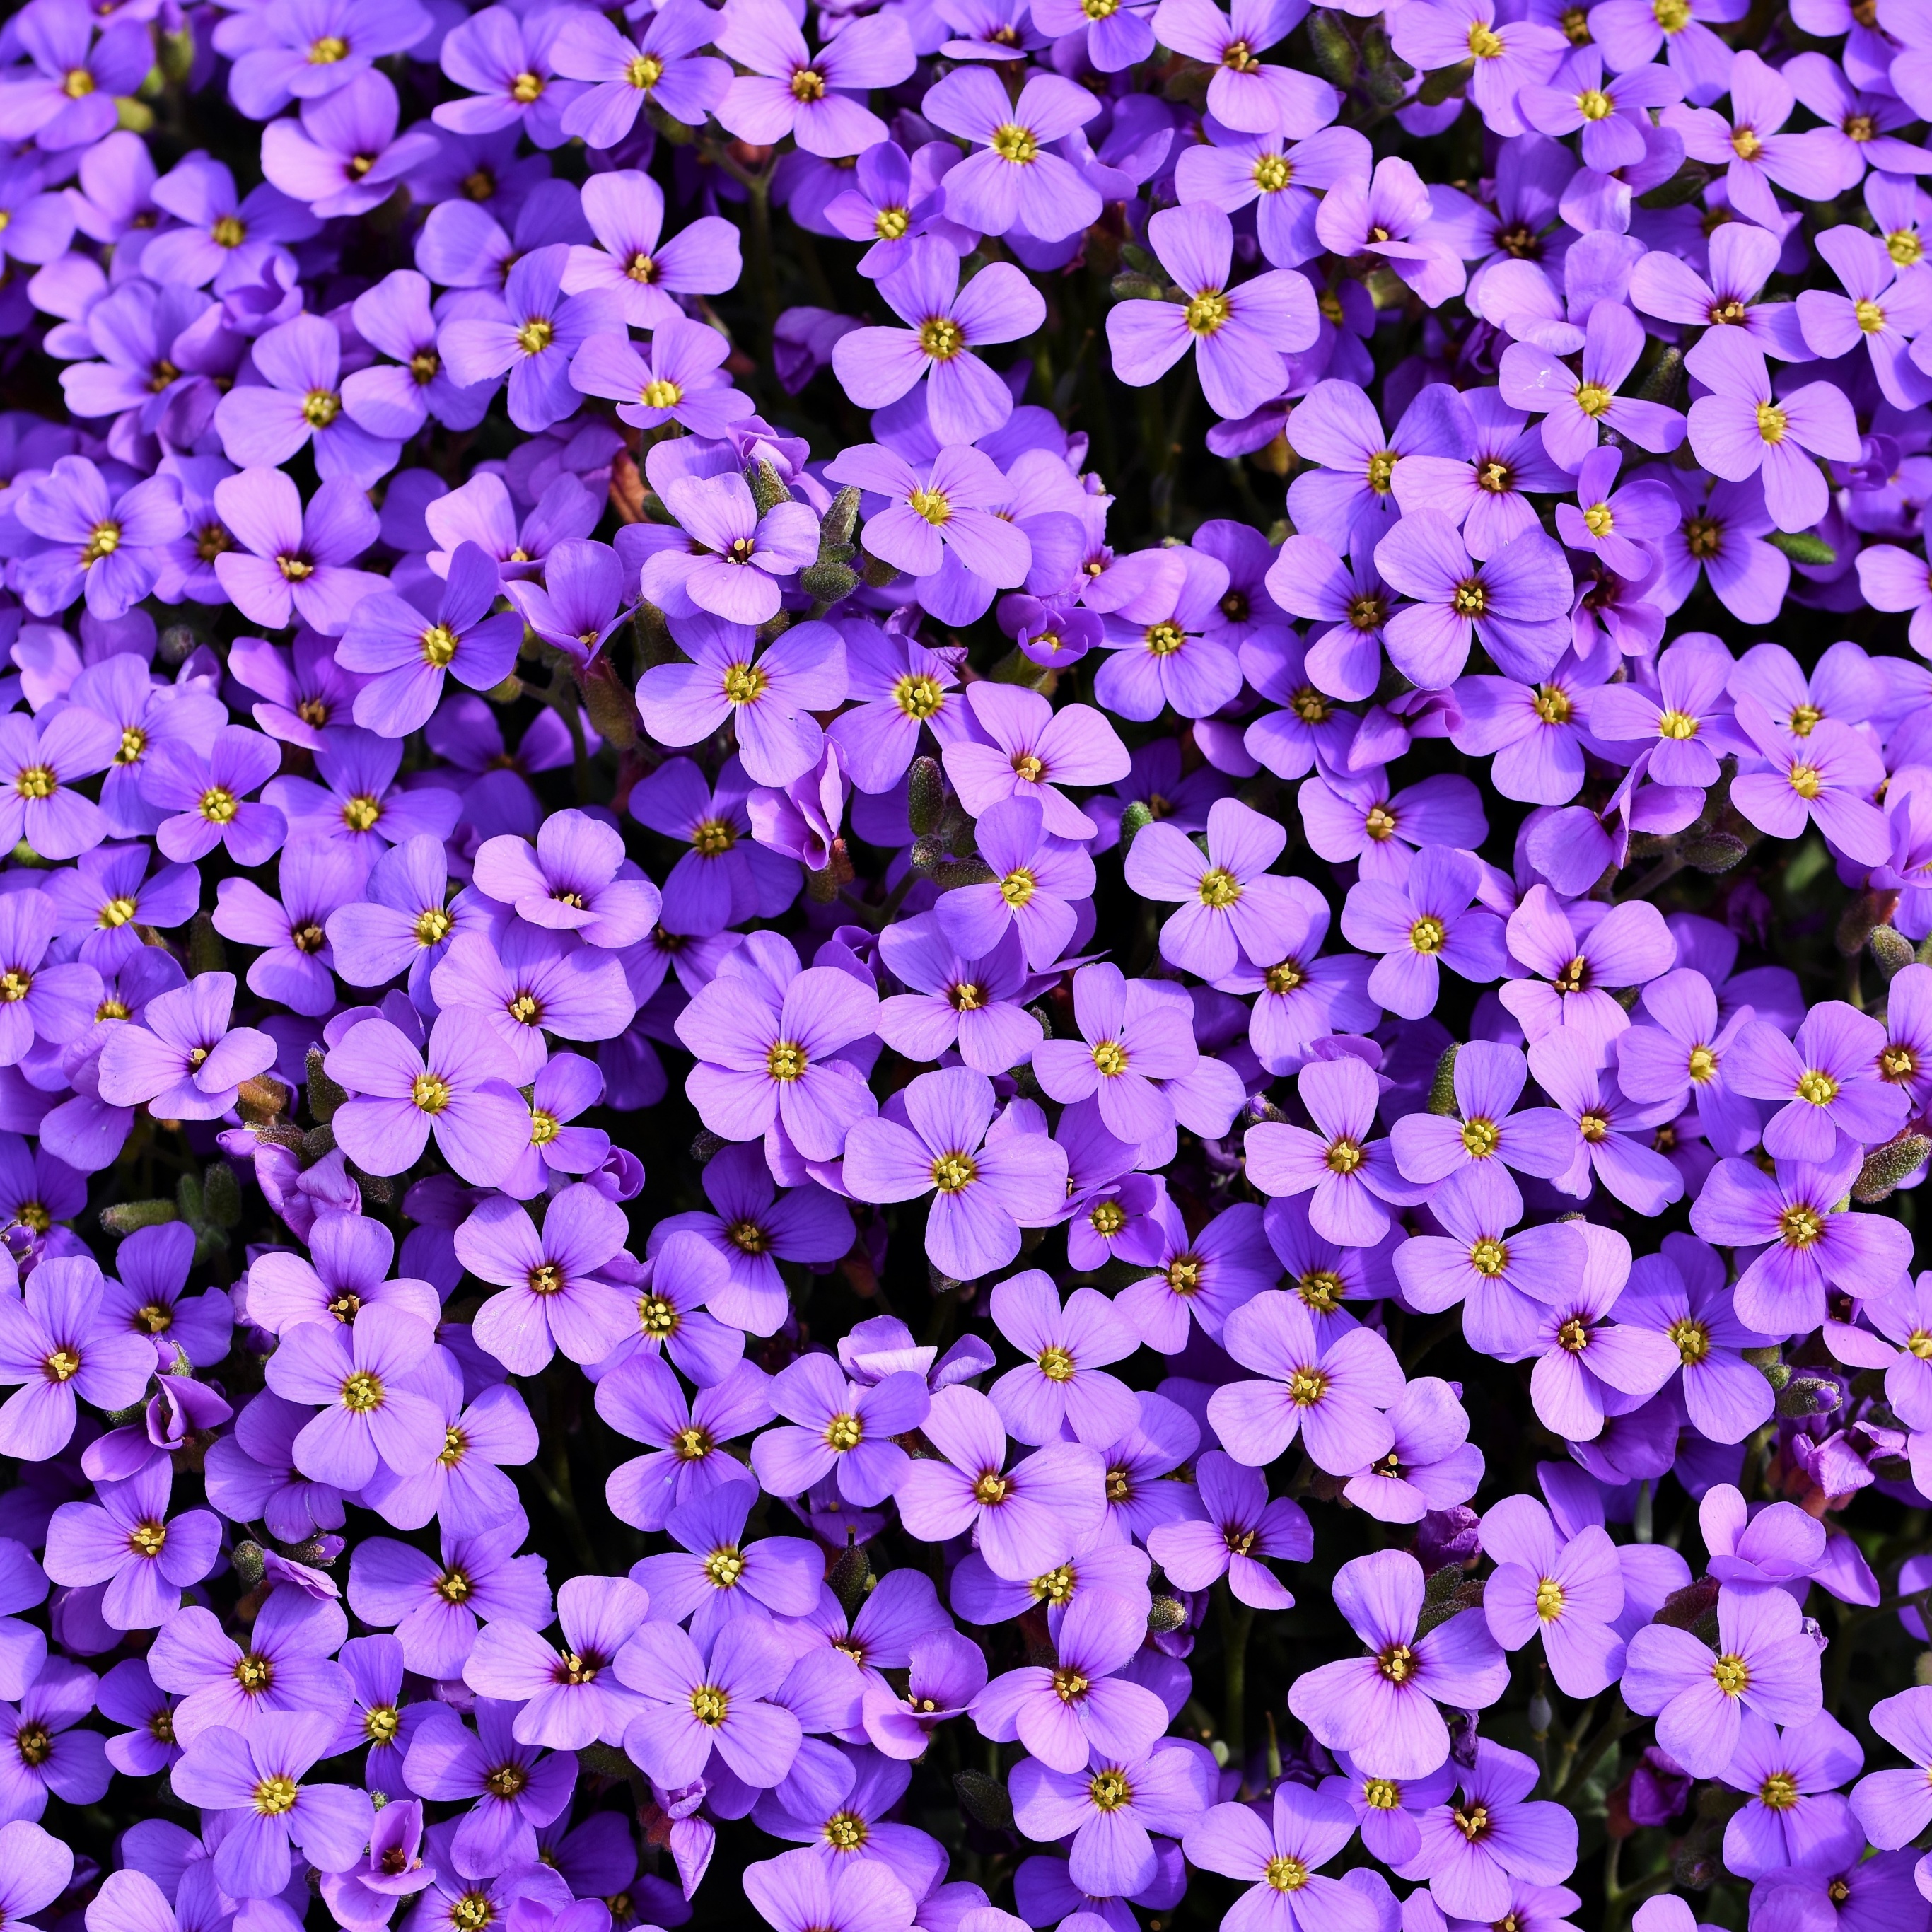 Flowers wallpapers ipad air ipad air 2 ipad 3 ipad 4 ipad mini 2 ipad  mini 3 ipad mini 4 ipad pro 97 for parallax desktop backgrounds hd  pictures and images